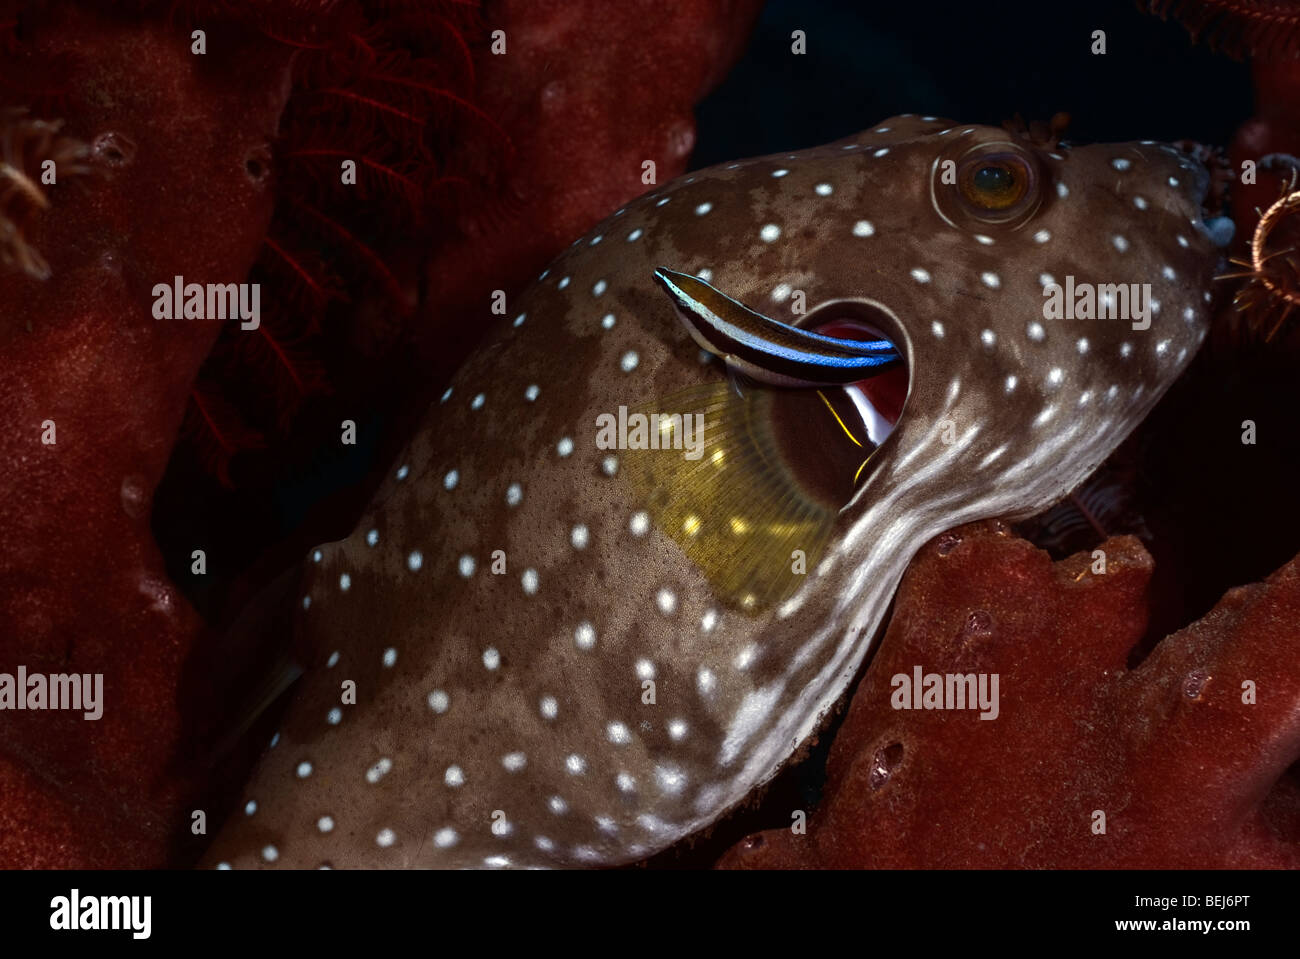 White-spotted Pufferfish with a cleaner wrasse resting on a sponge under water. Stock Photo